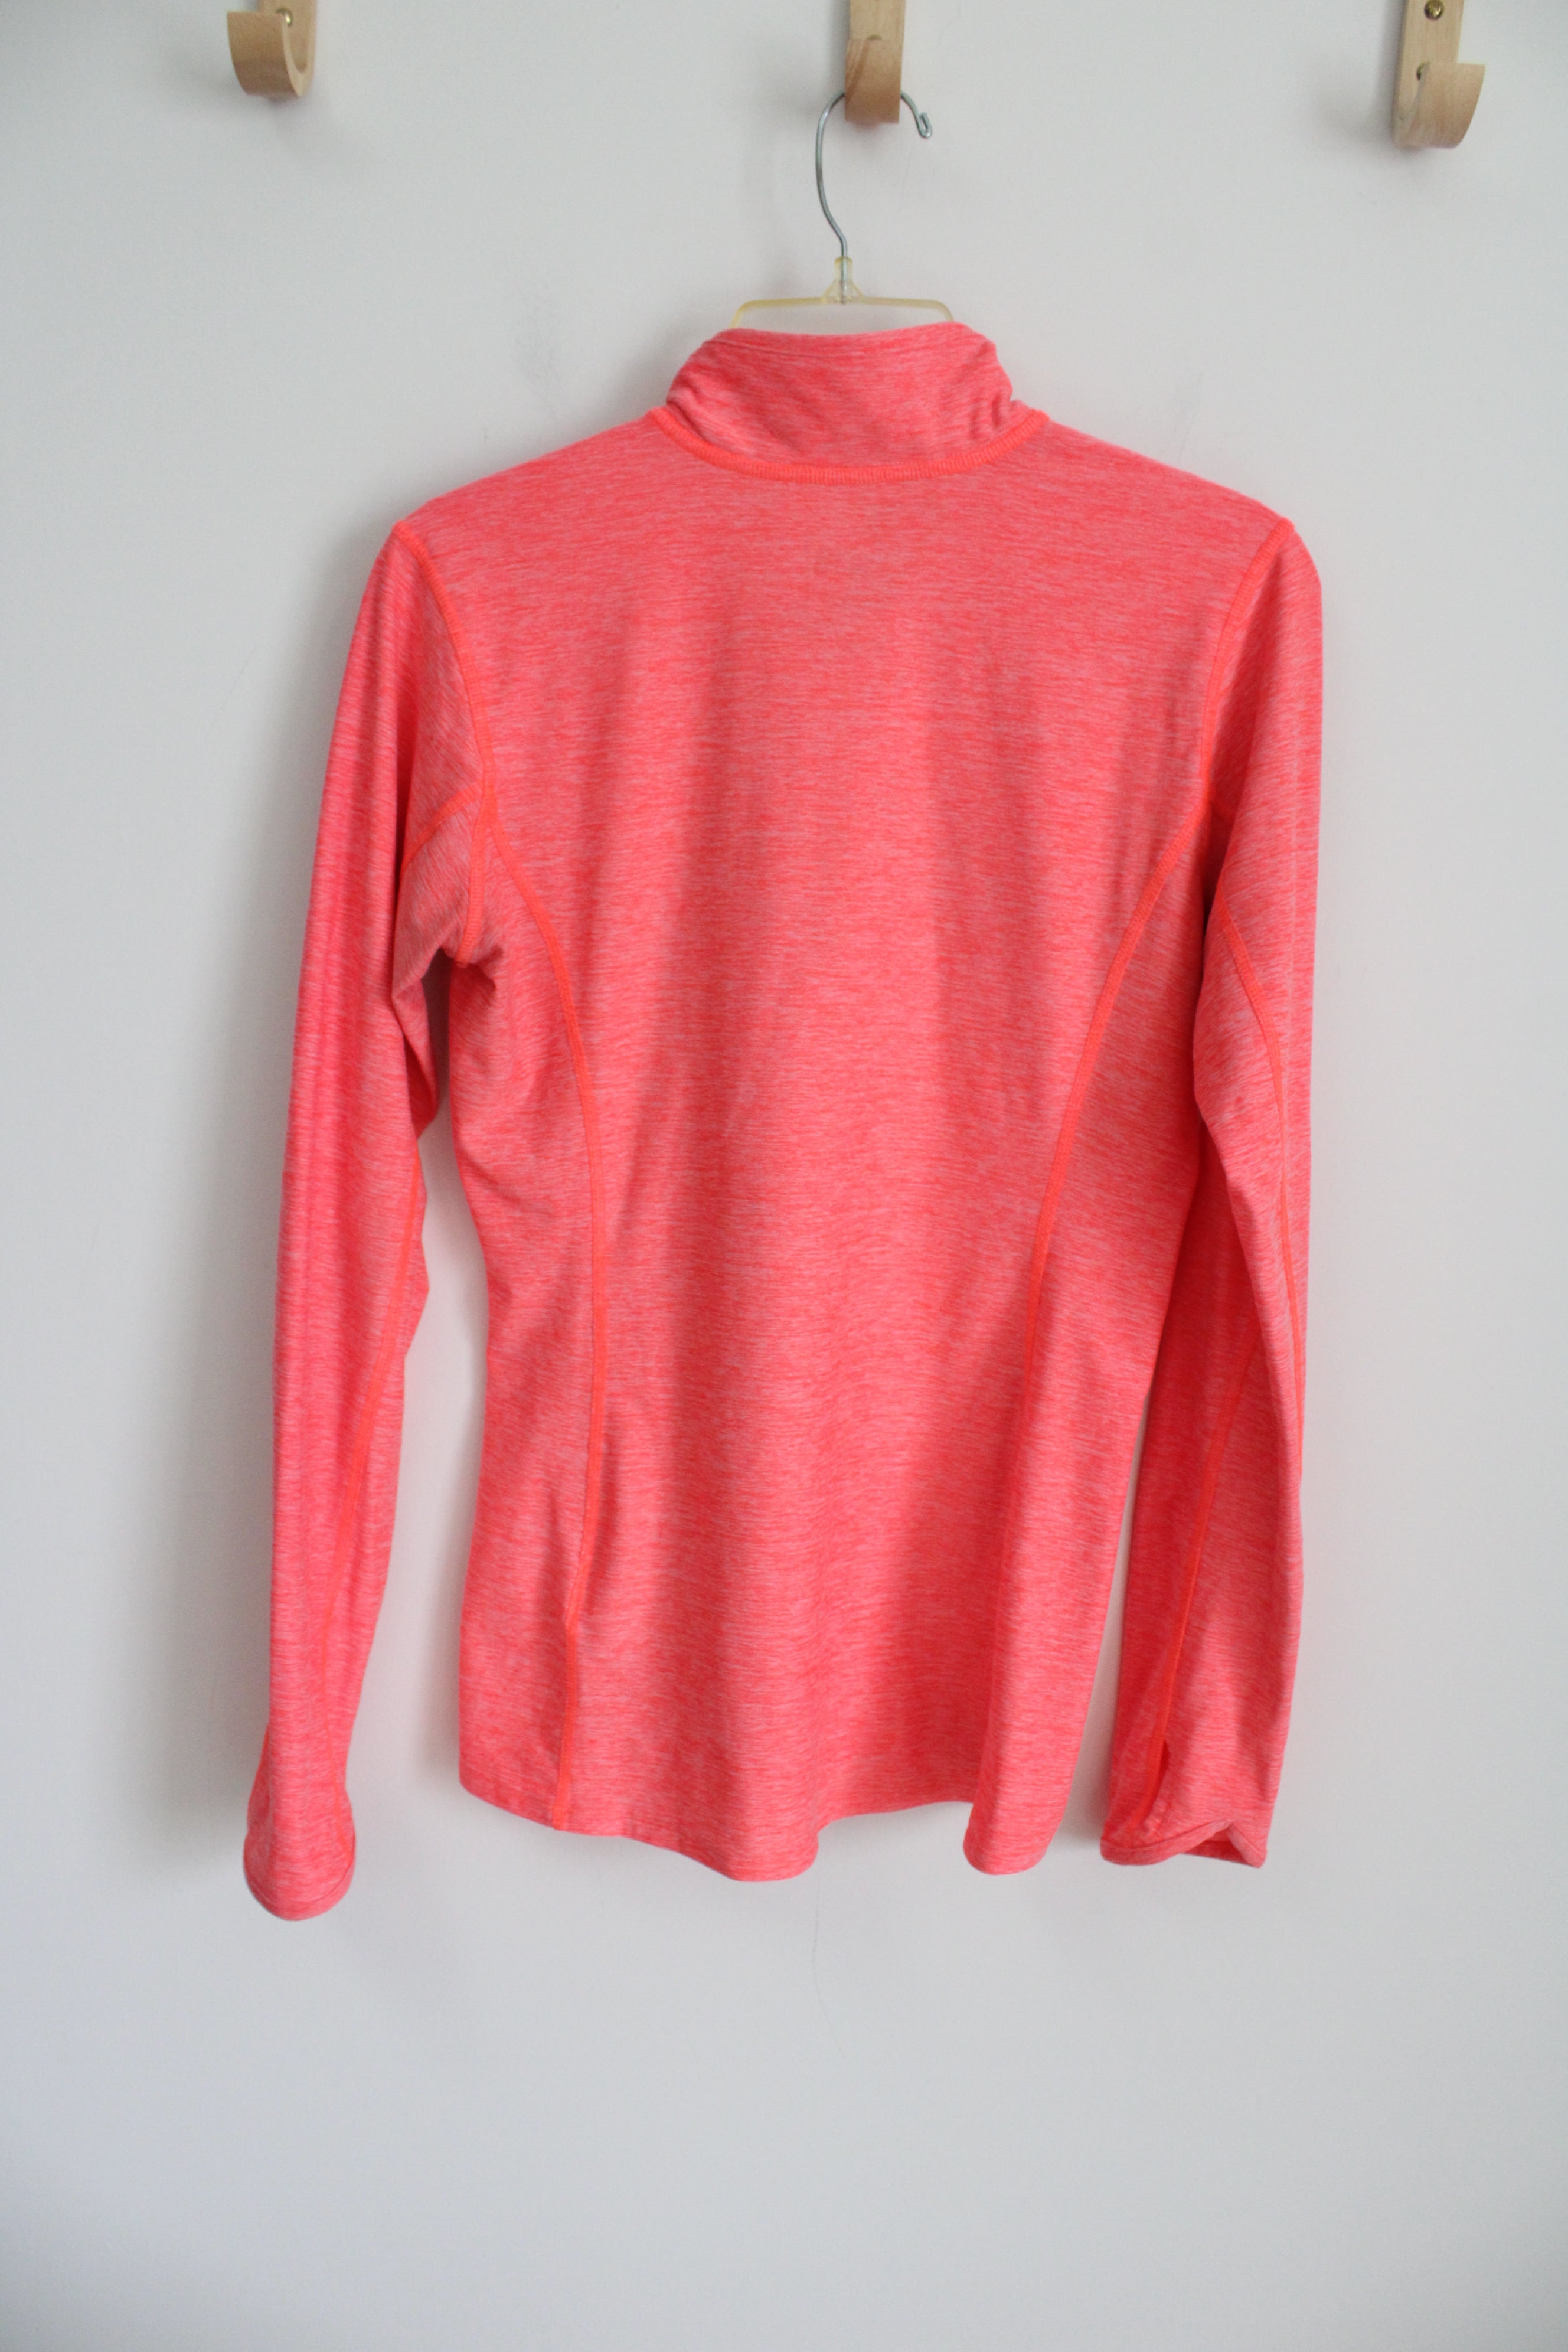 The North Face Neon Pink 1/4 Zip Pullover | S